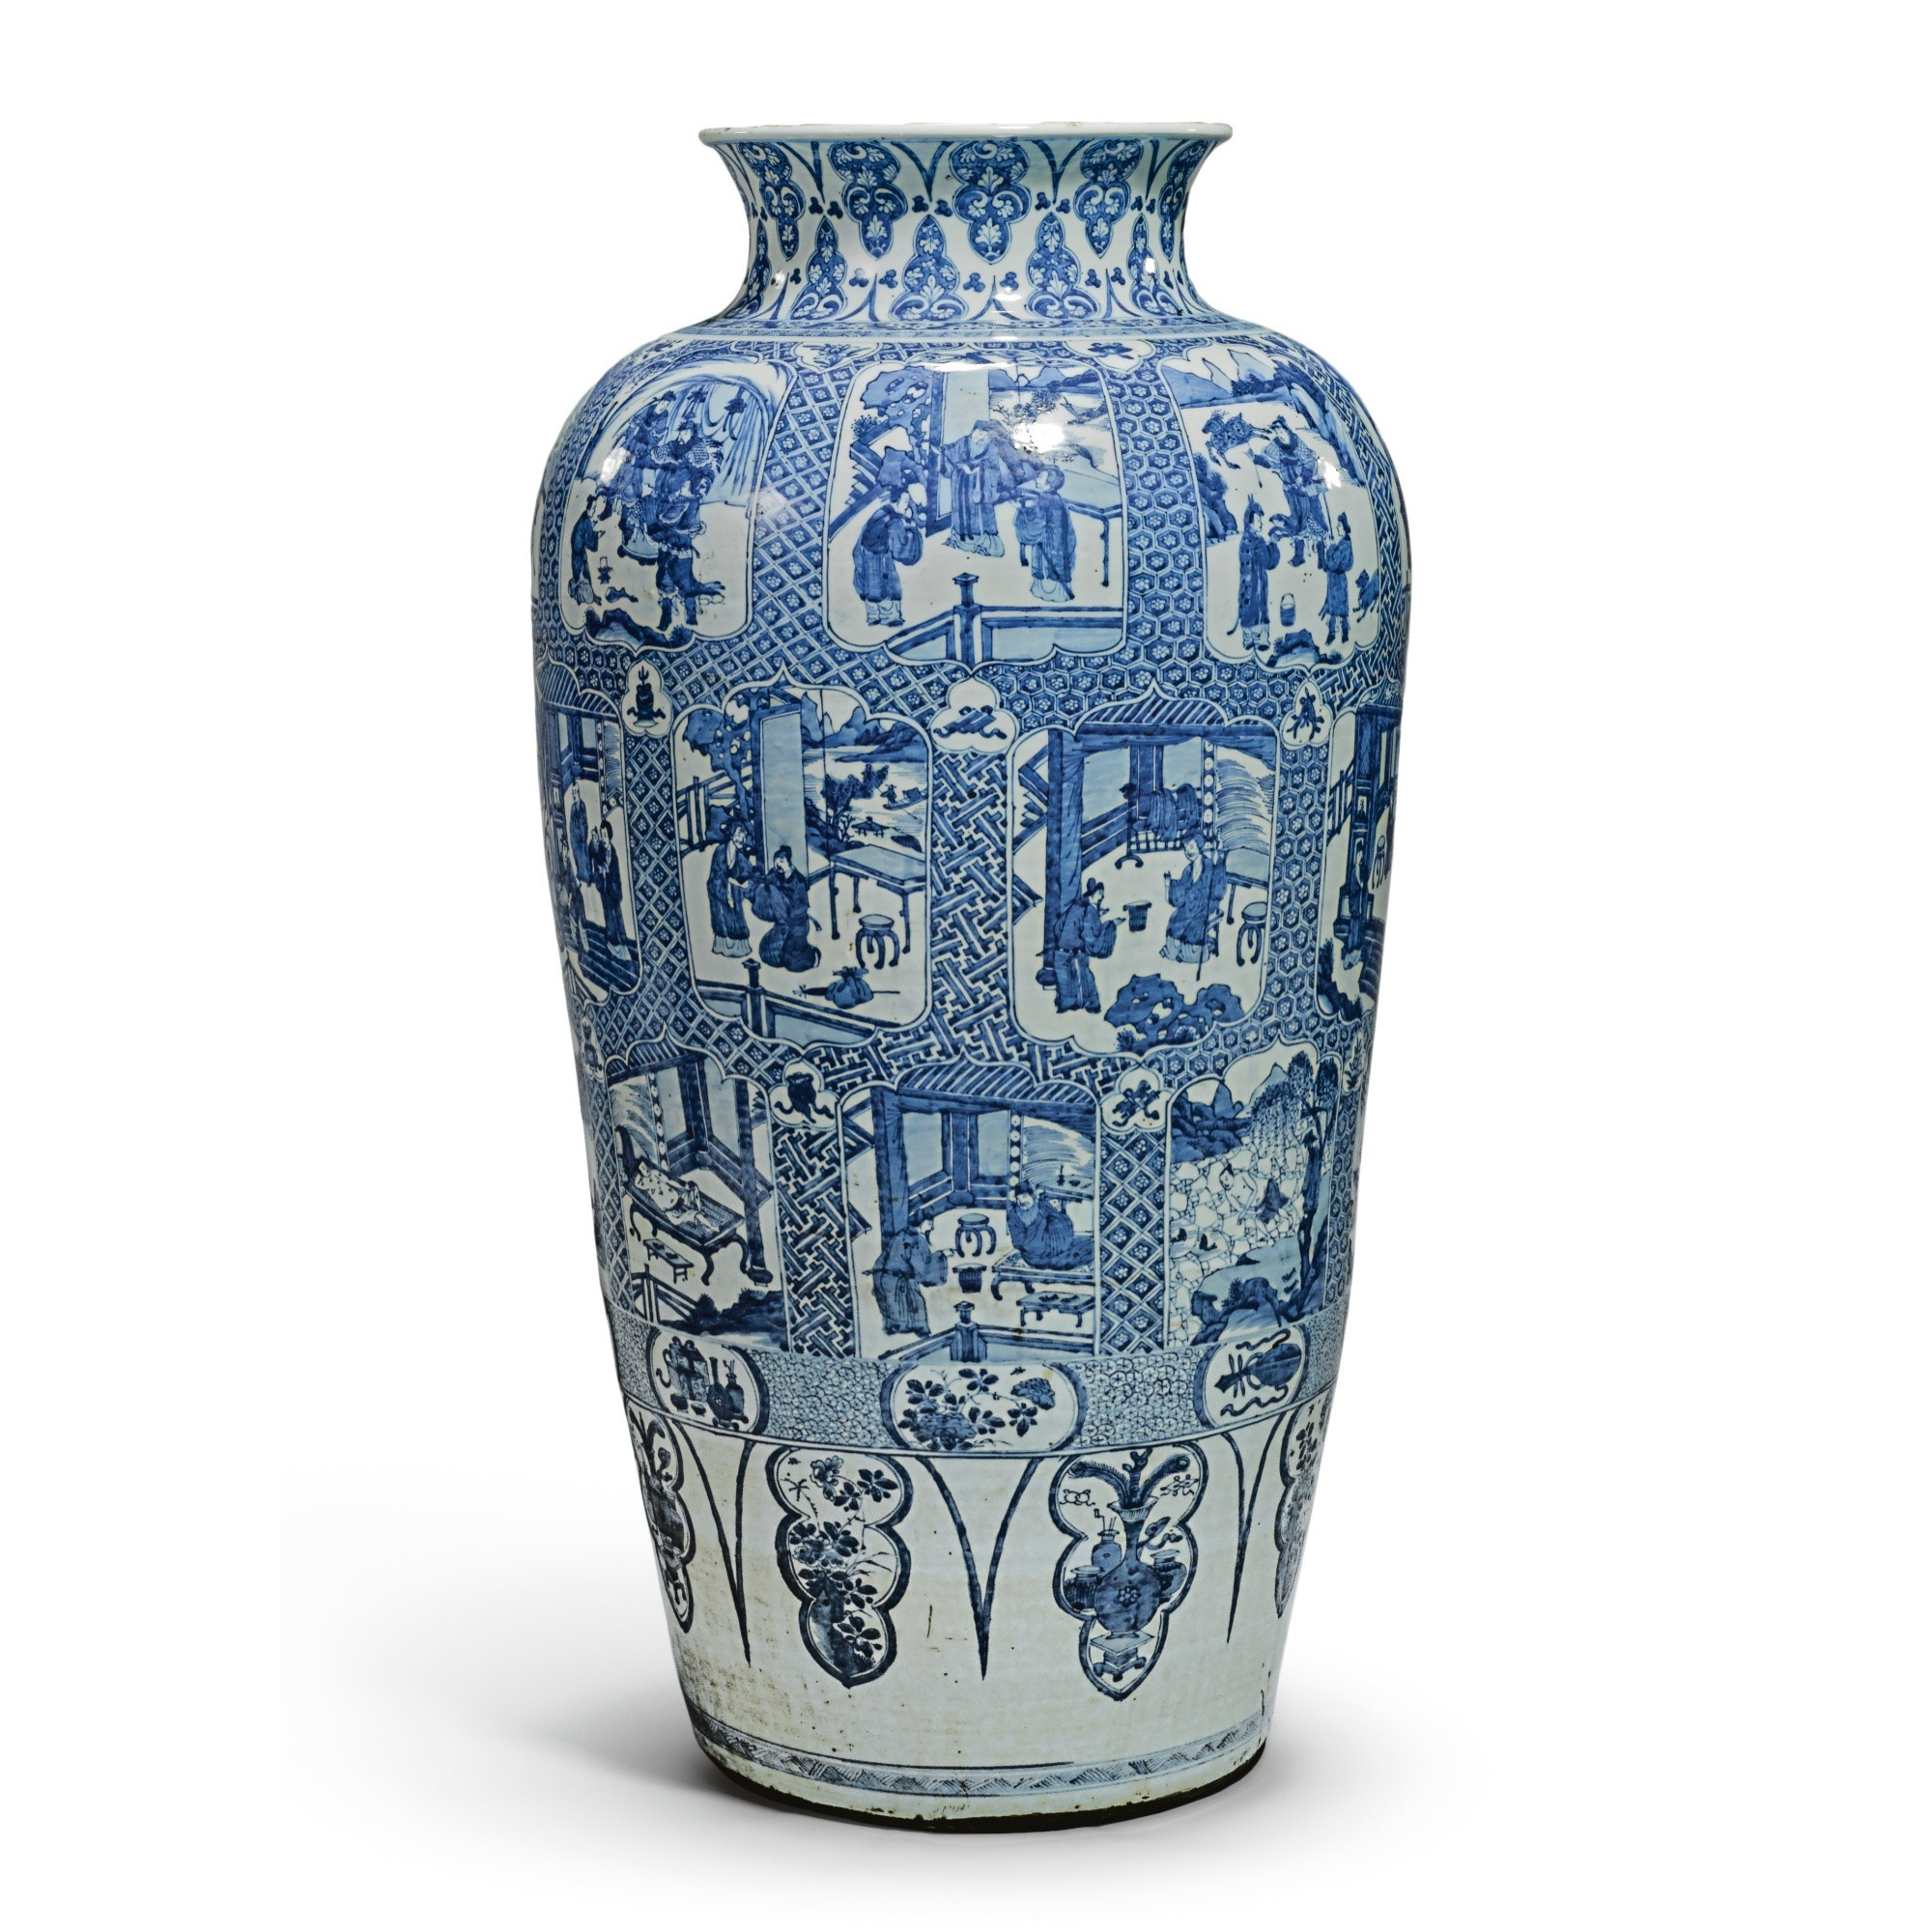 25 Recommended Large White Vases Online 2023 free download large white vases online of a large chinese kangxi blue and white soldier vase painted with for a large chinese kangxi blue and white soldier vase painted with the twenty